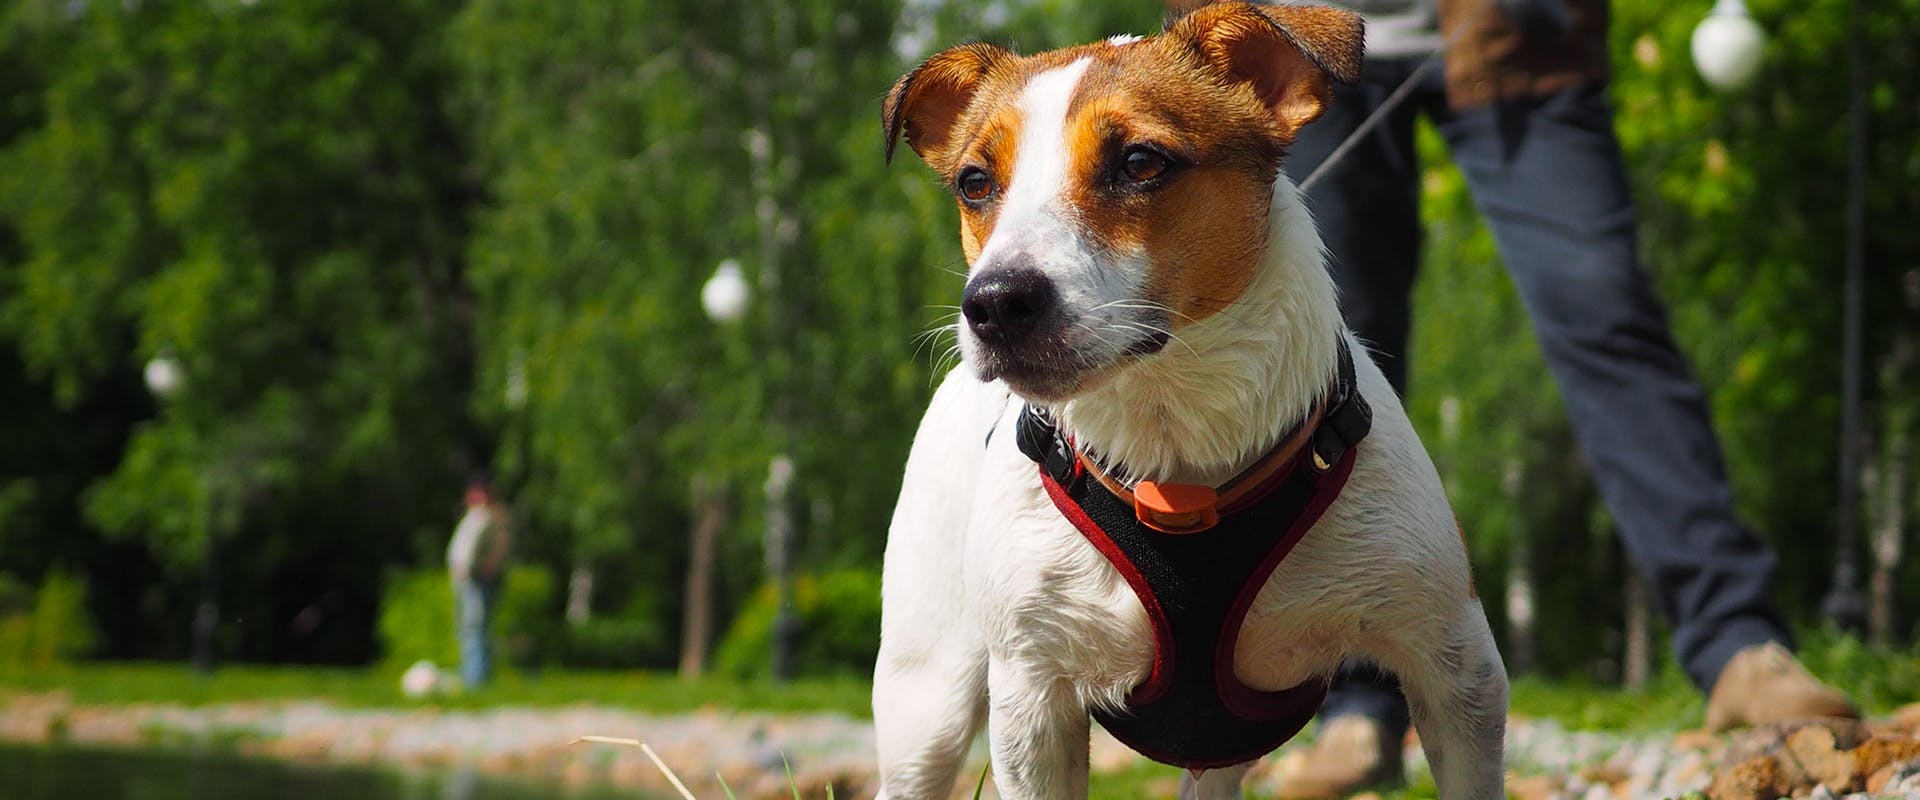 A Jack Russell dog walking through a park, wearing a red and black small dog harness